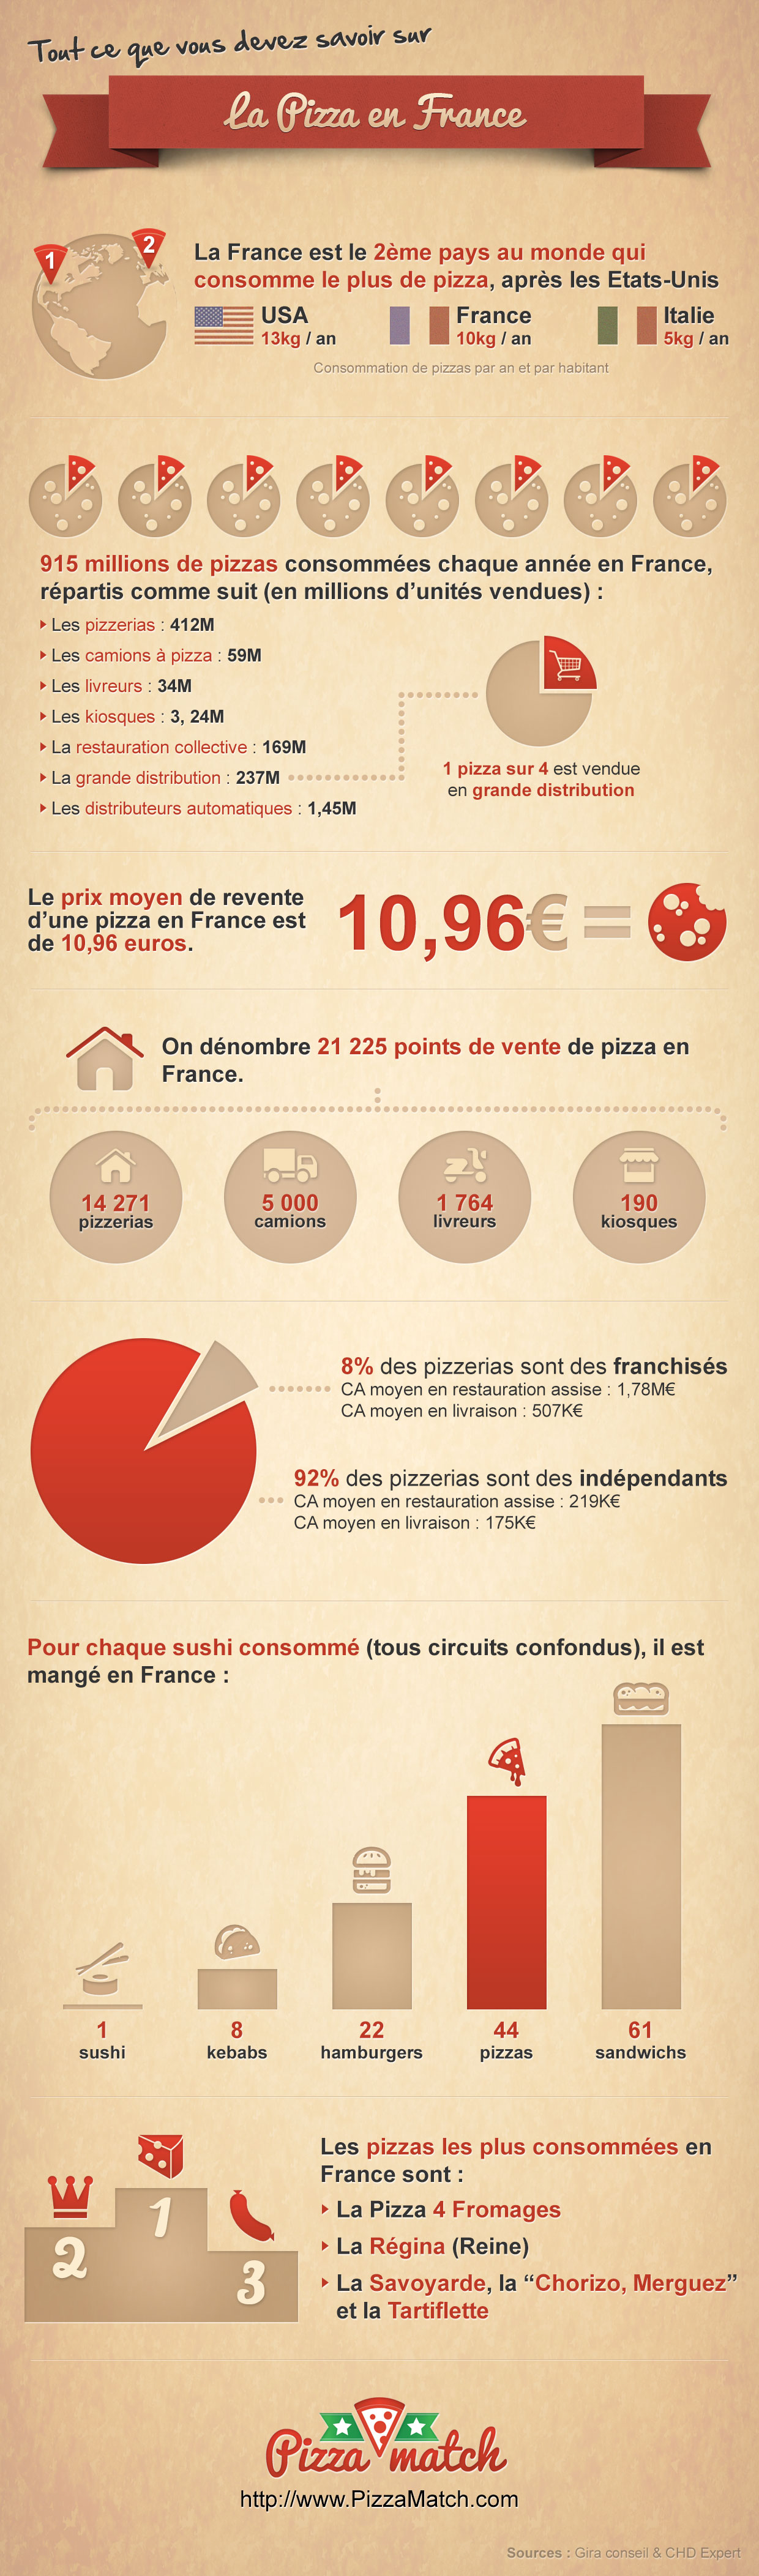 infographie pizza